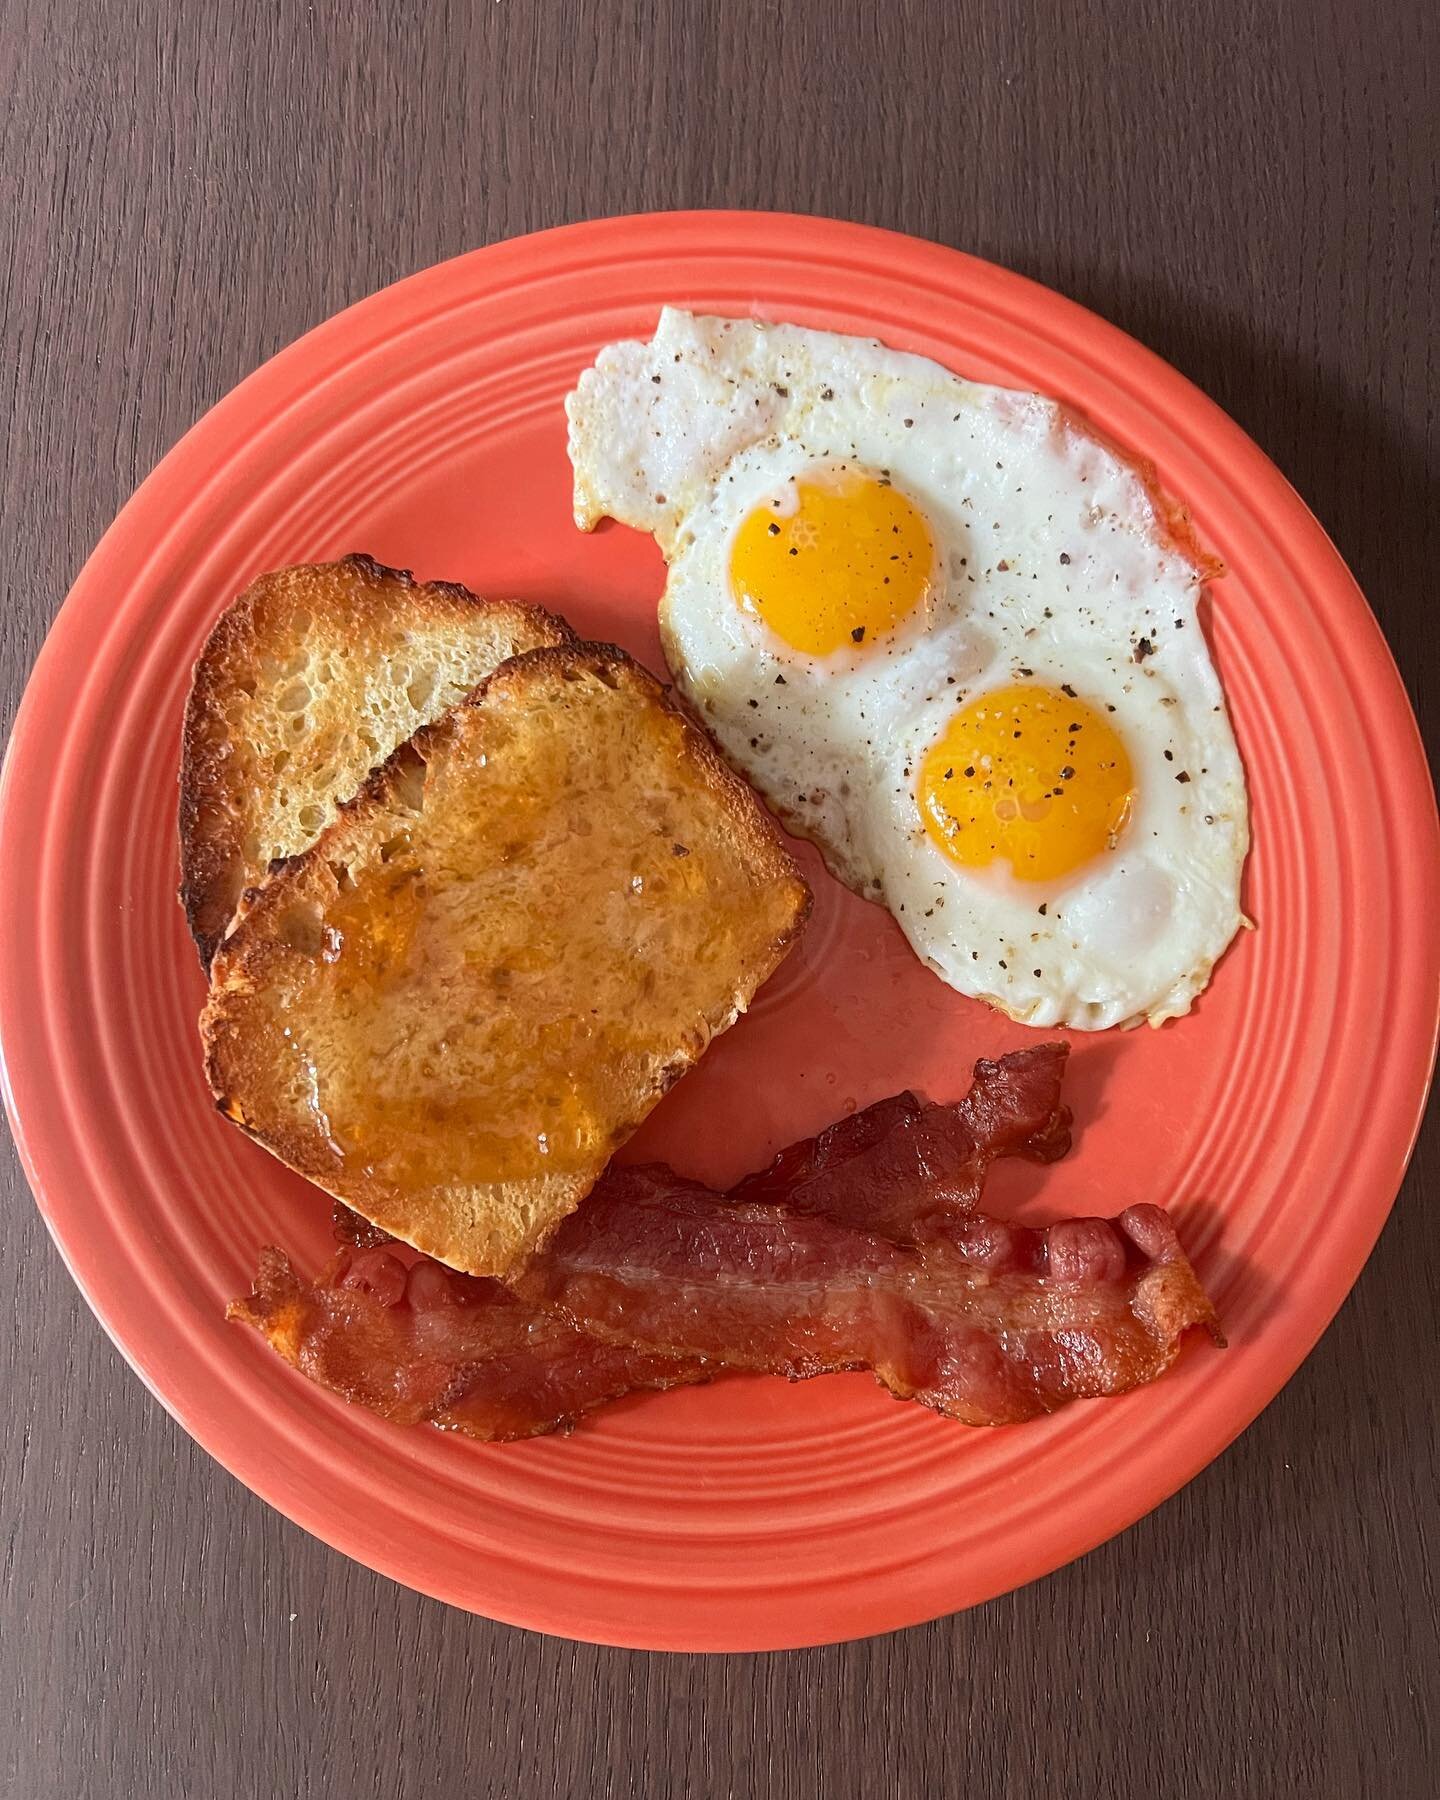 When sweet friends come over for dinner and bring you homemade bread and eggs from their backyard chickens, you can make a killer breakfast to soothe your mild hangover. Of course, I got no pictures of said friends or said dinner because I am a dork.